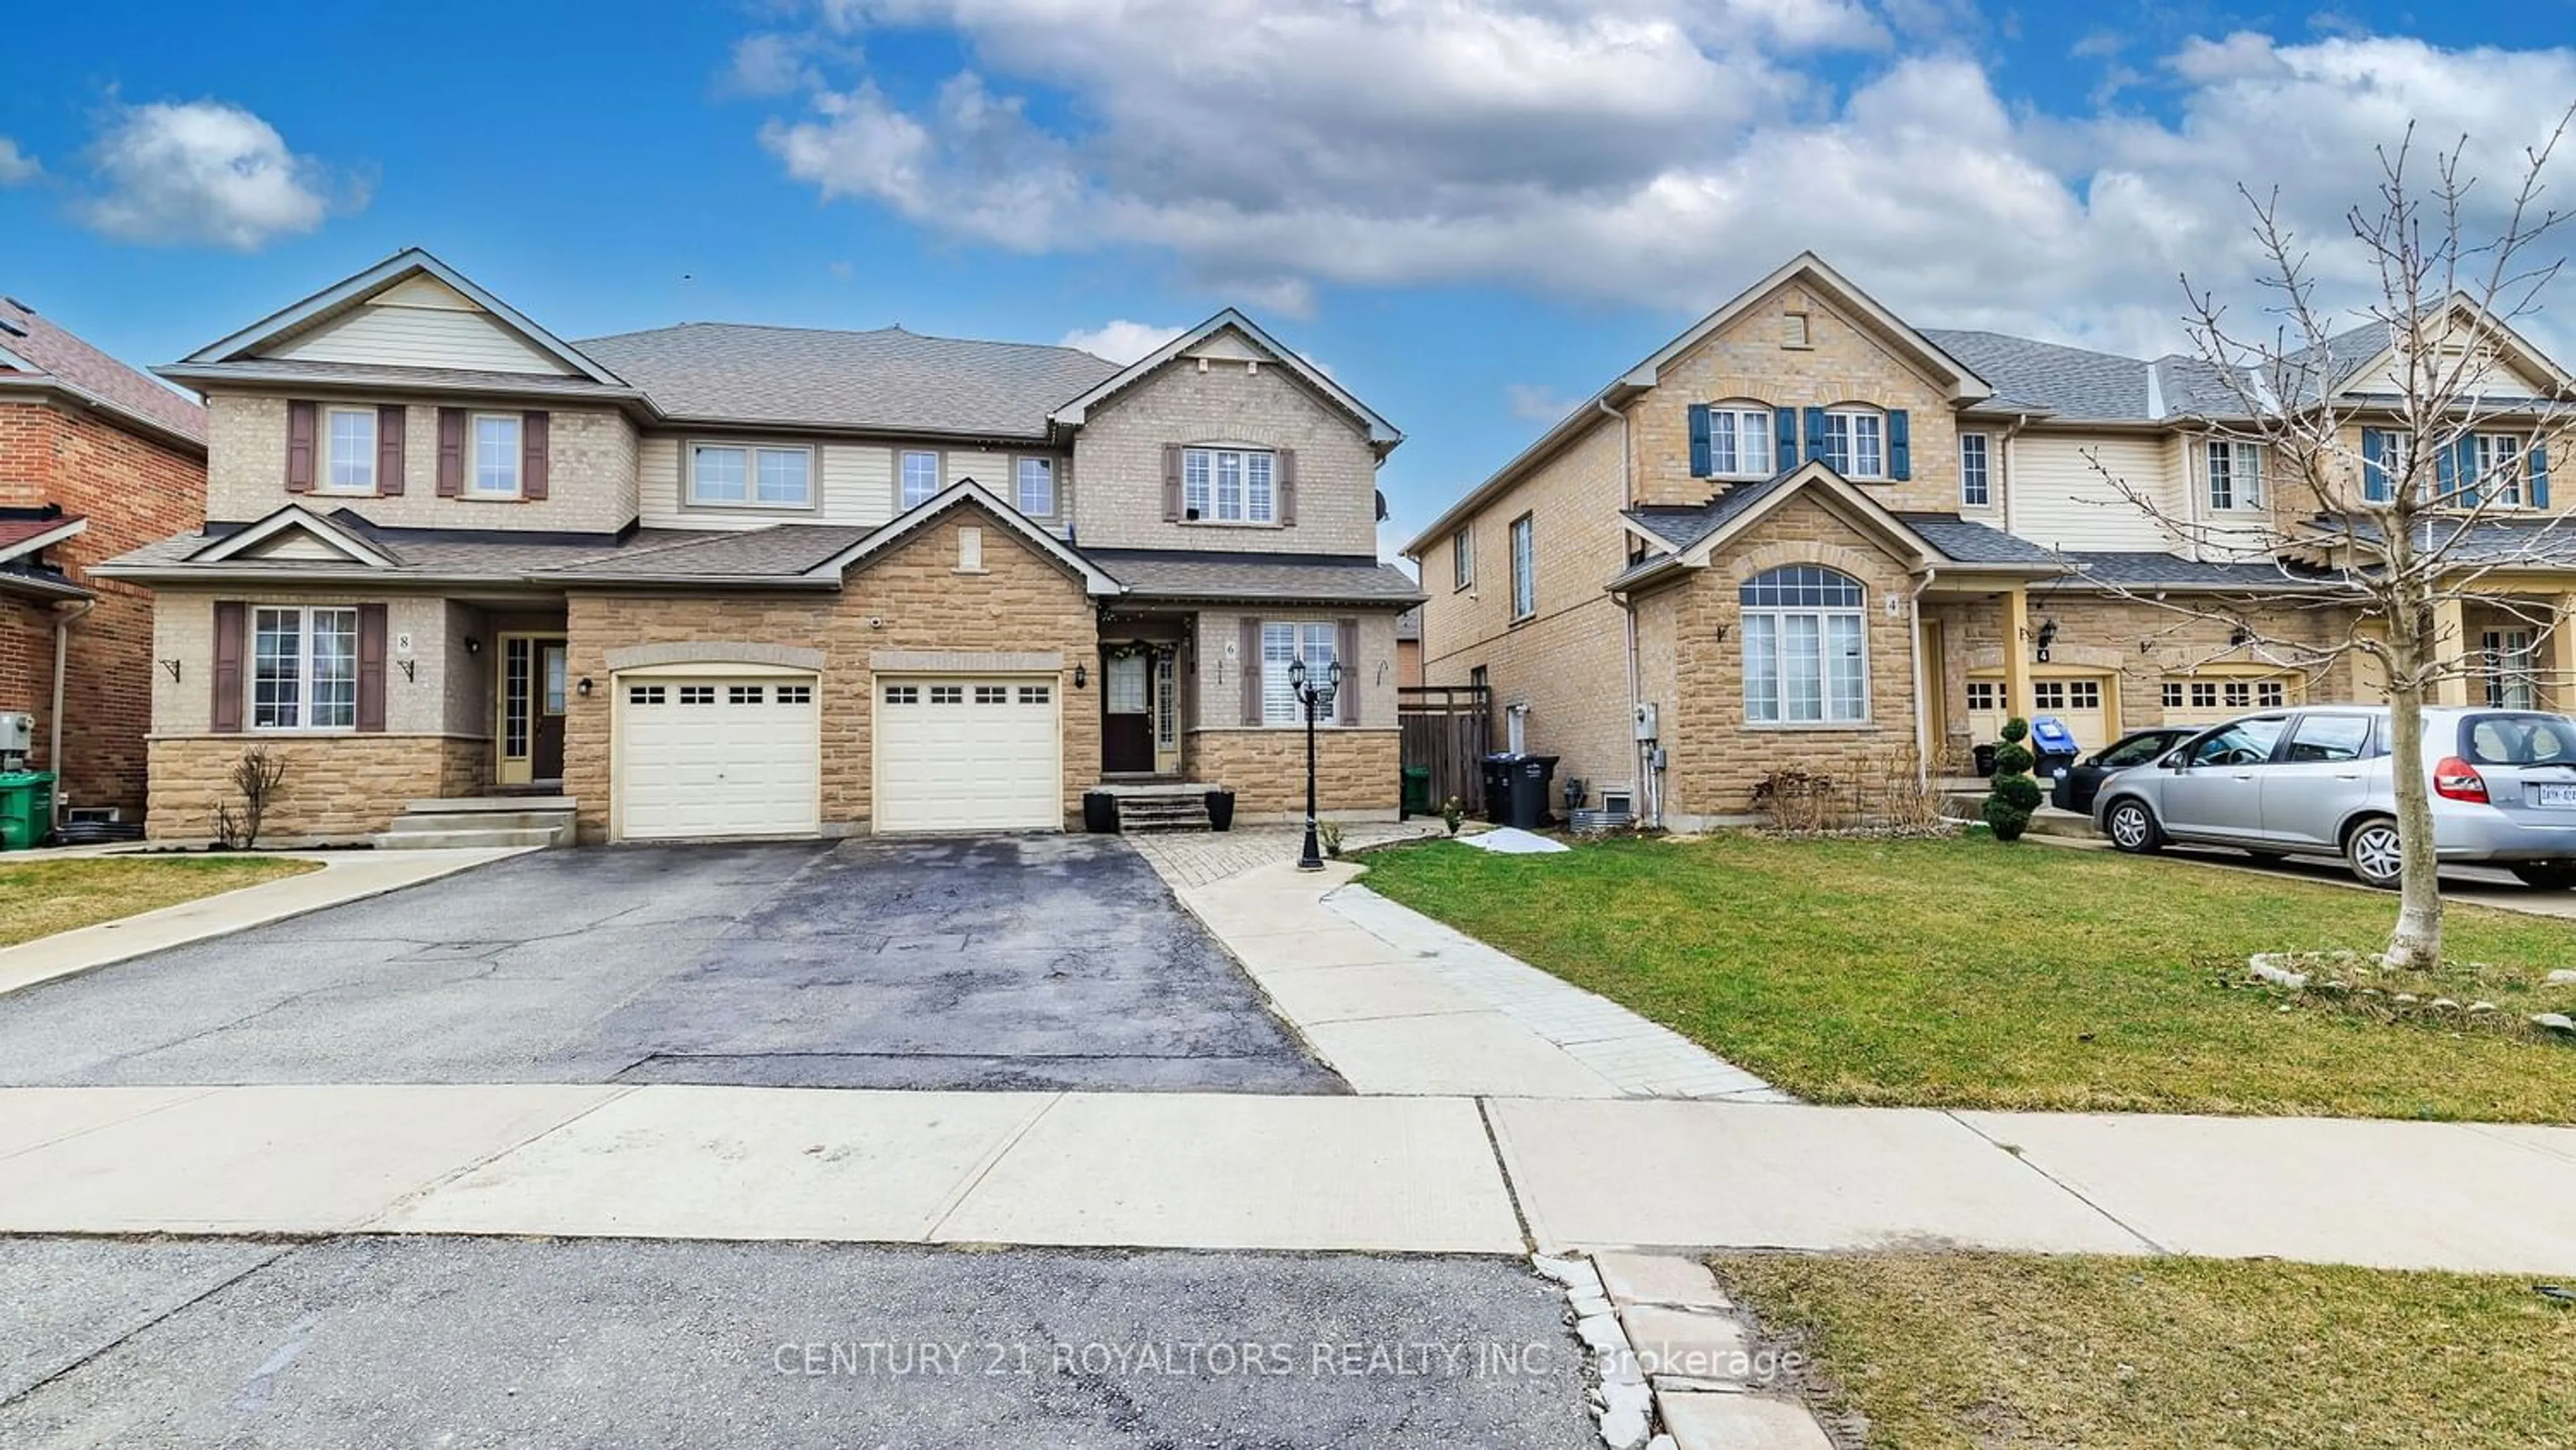 Frontside or backside of a home for 6 Viceroy Cres, Brampton Ontario L7A 1V6